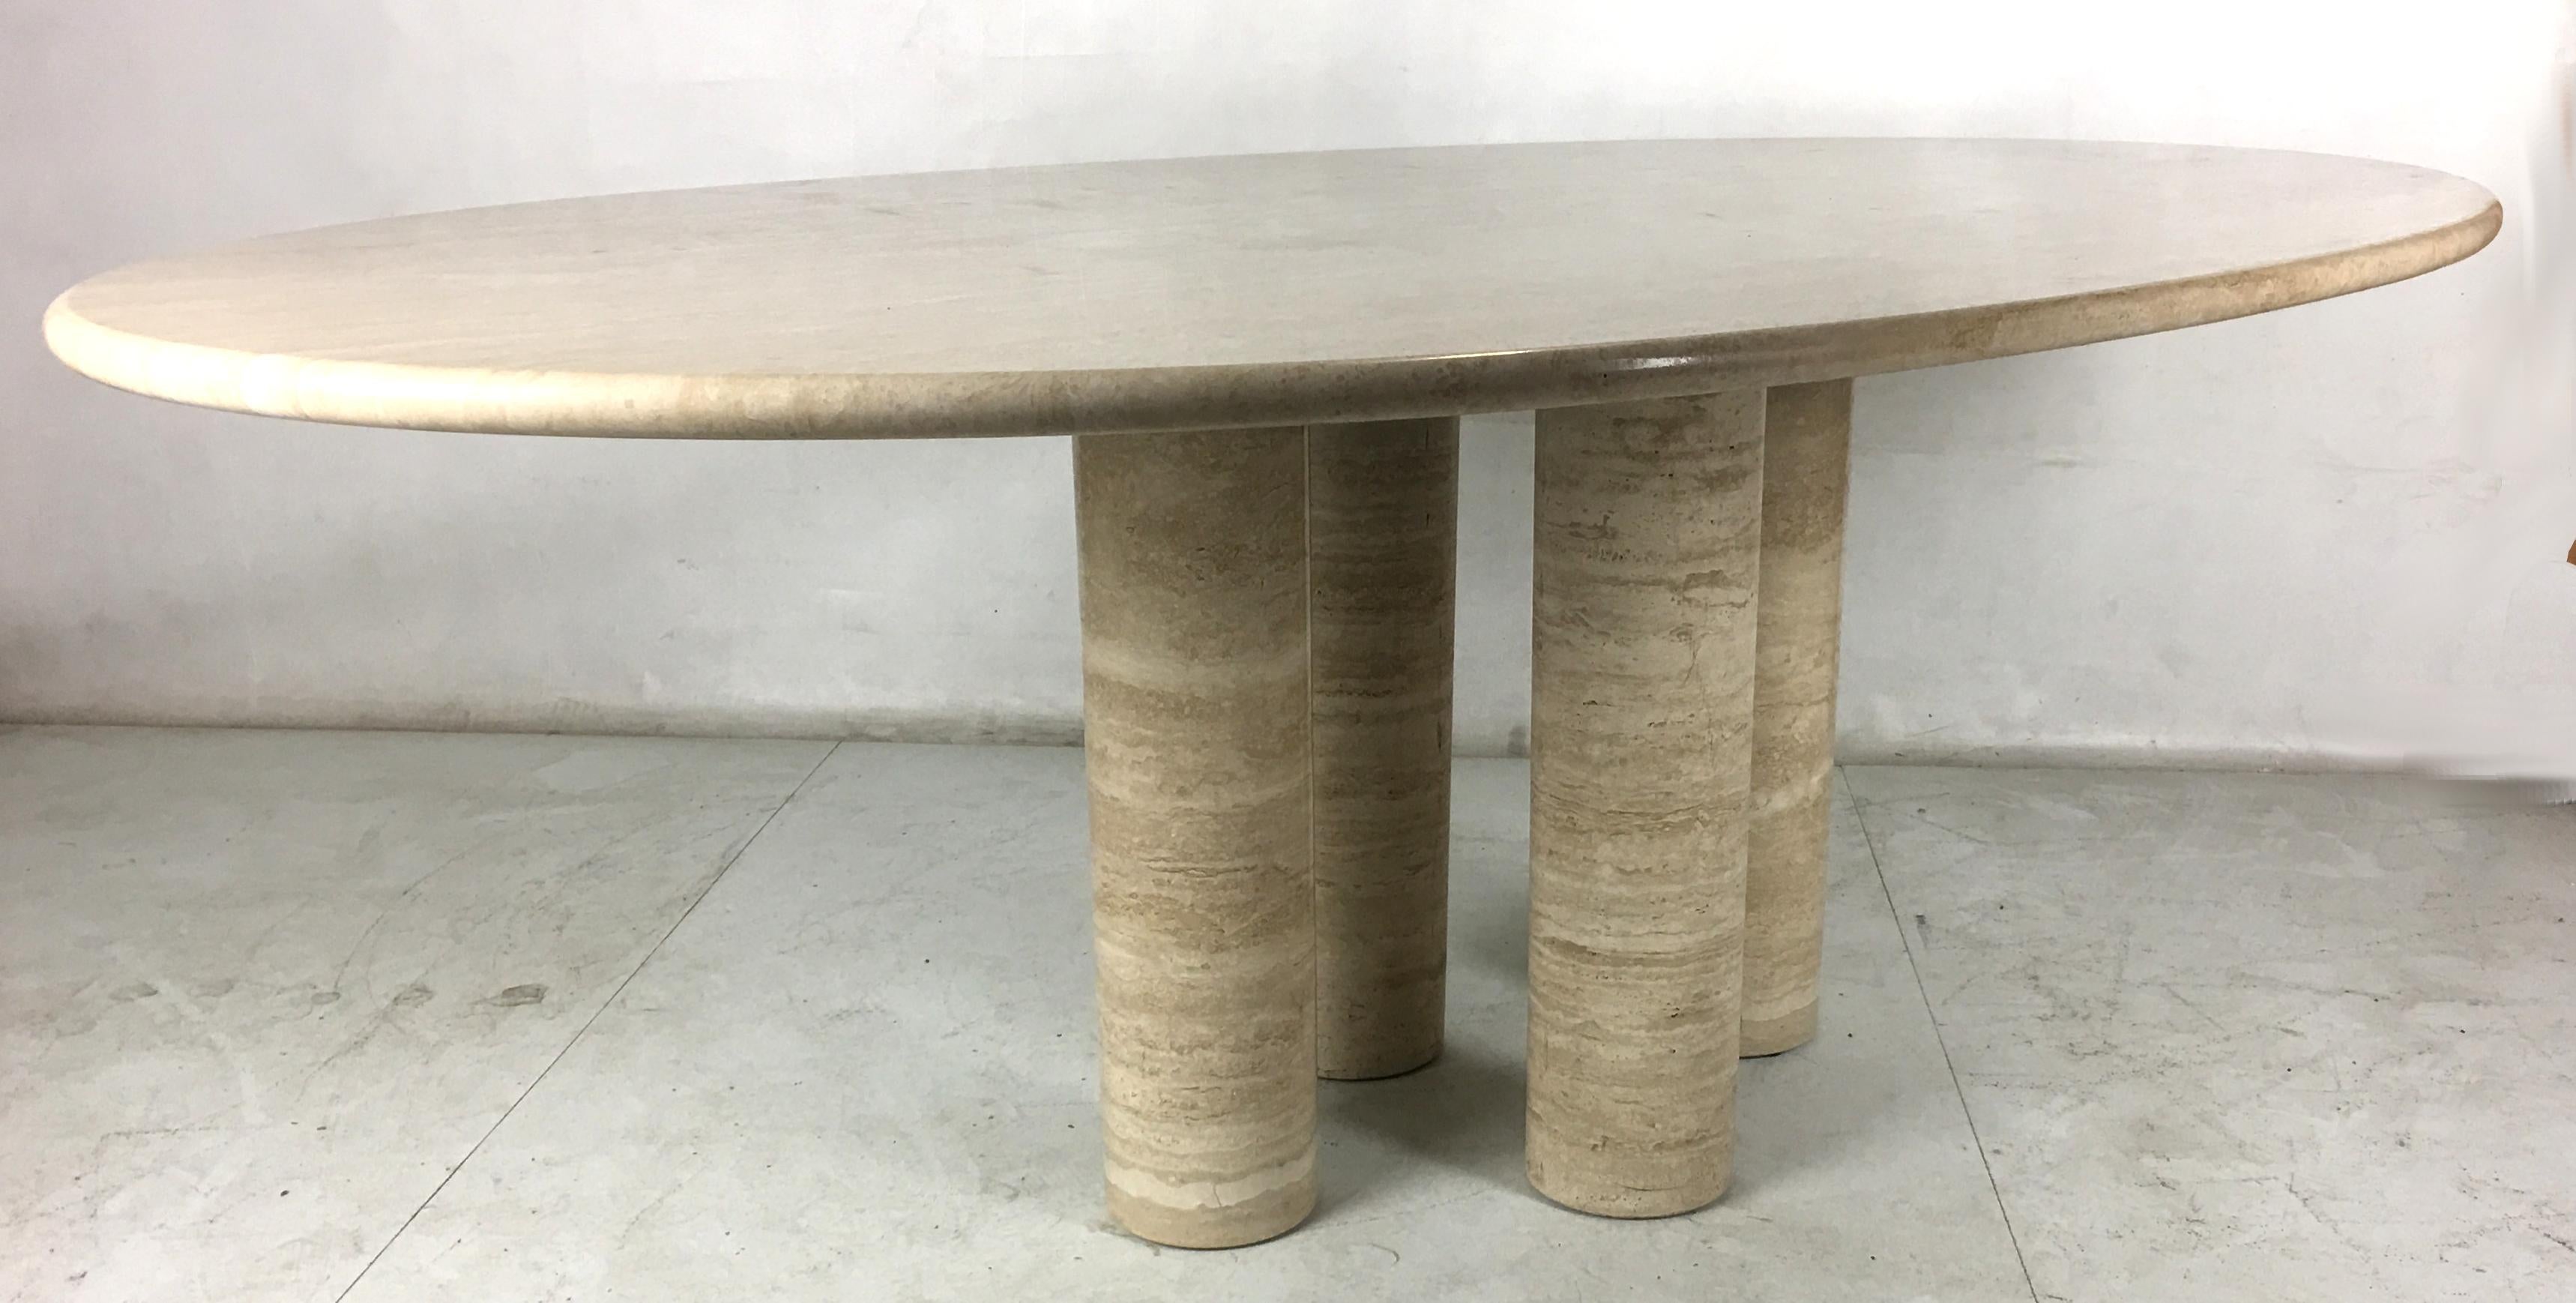 Stunning and rare II Colonnato dining table in solid Travertino Romano by Mario Bellini for Cassina, circa 1977. This rare table was only made for a few years, from 1977 through 1980. The 1.25